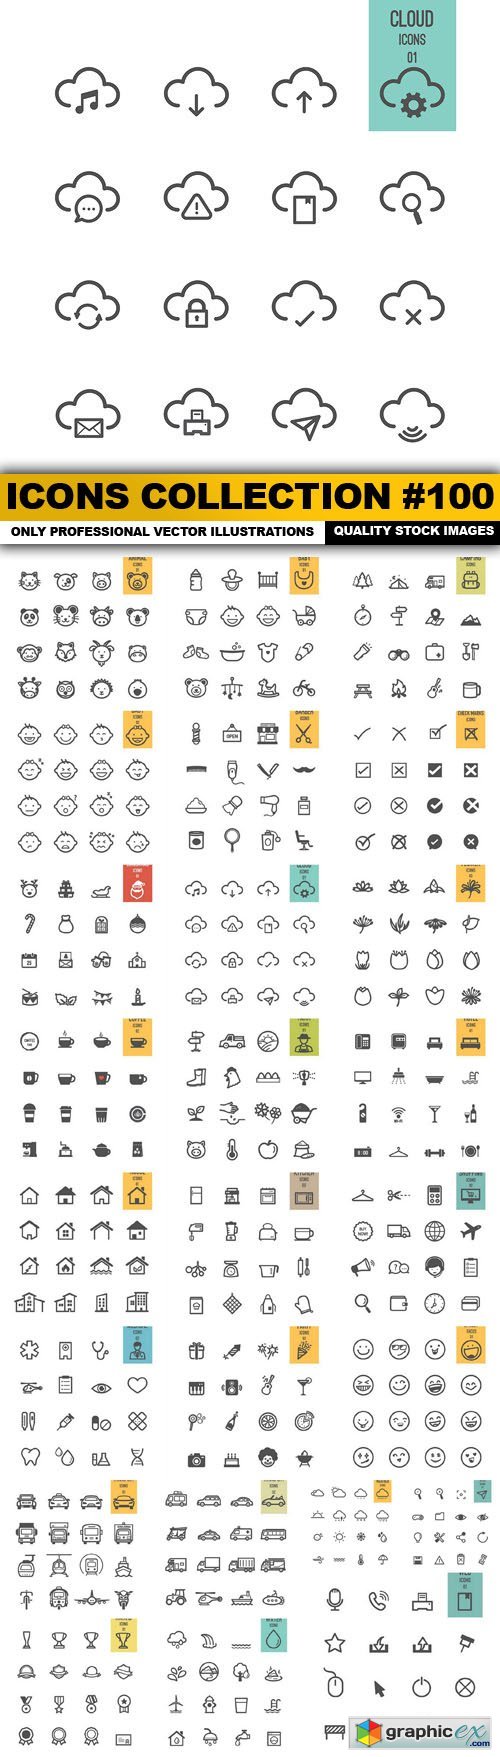 Icons Collection #100 - 25 Vector